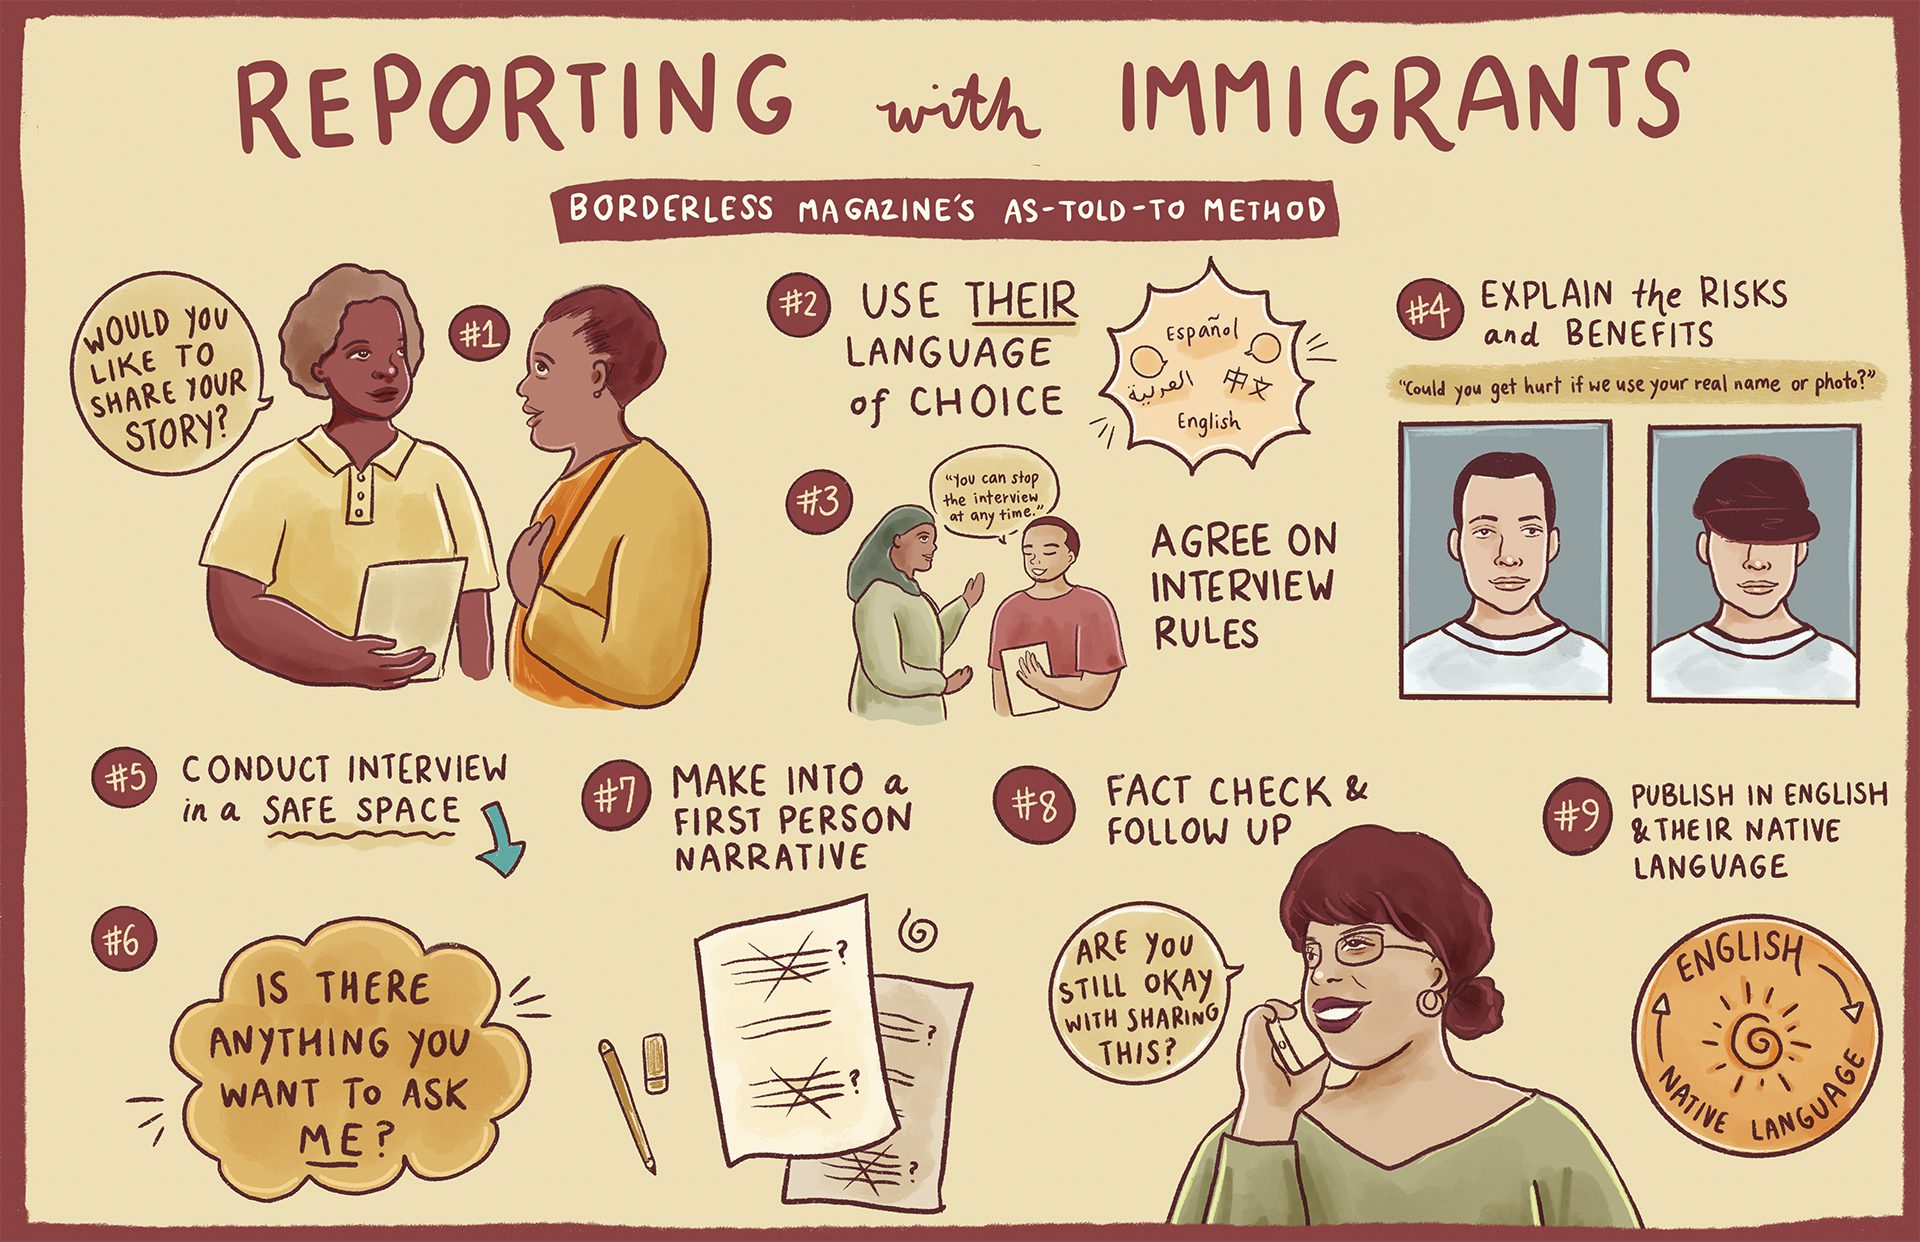 "Reporting with Immigrants" Borderless Magazine's as-told-to method 1."Would you like to share your story?" 2. use their language of choice 3. agree on interview rules 4. explain the risks and benefits 5. conduct interivew in a safe space 6. "Is there anything you want to ask ME?" 7. make into a first person narrative 8. fact check and follow up 9. publish in english and thier native language